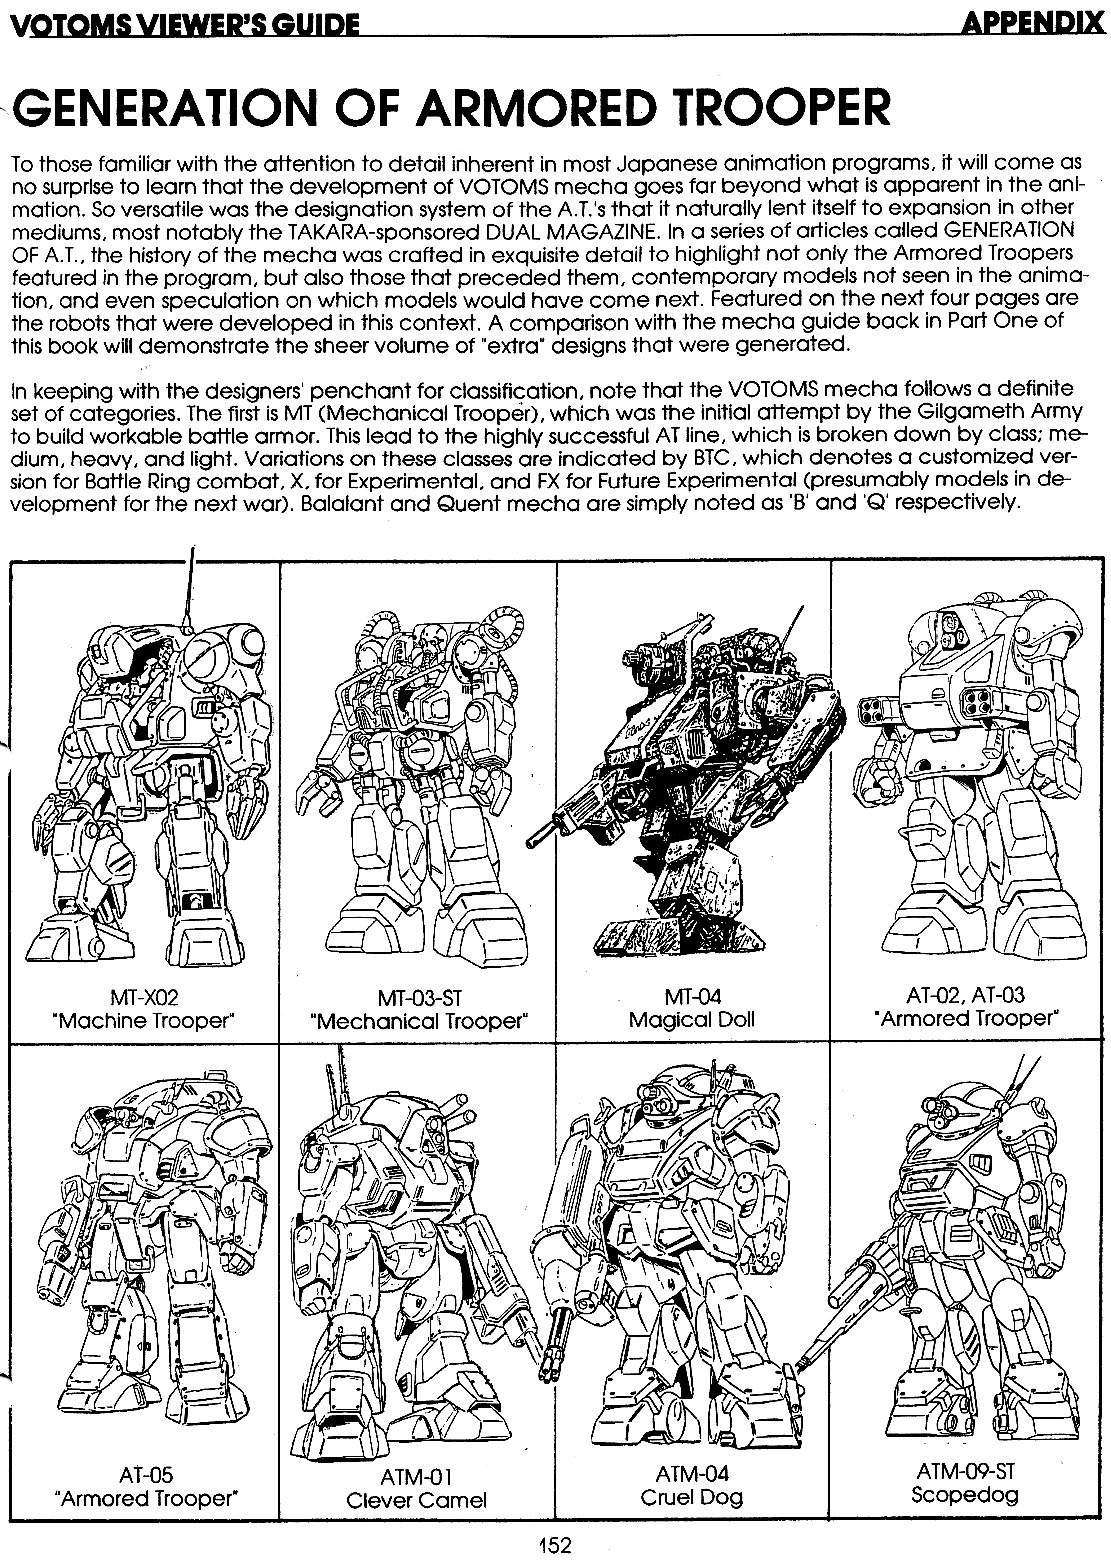 VOTOMS Viewing Guide 152